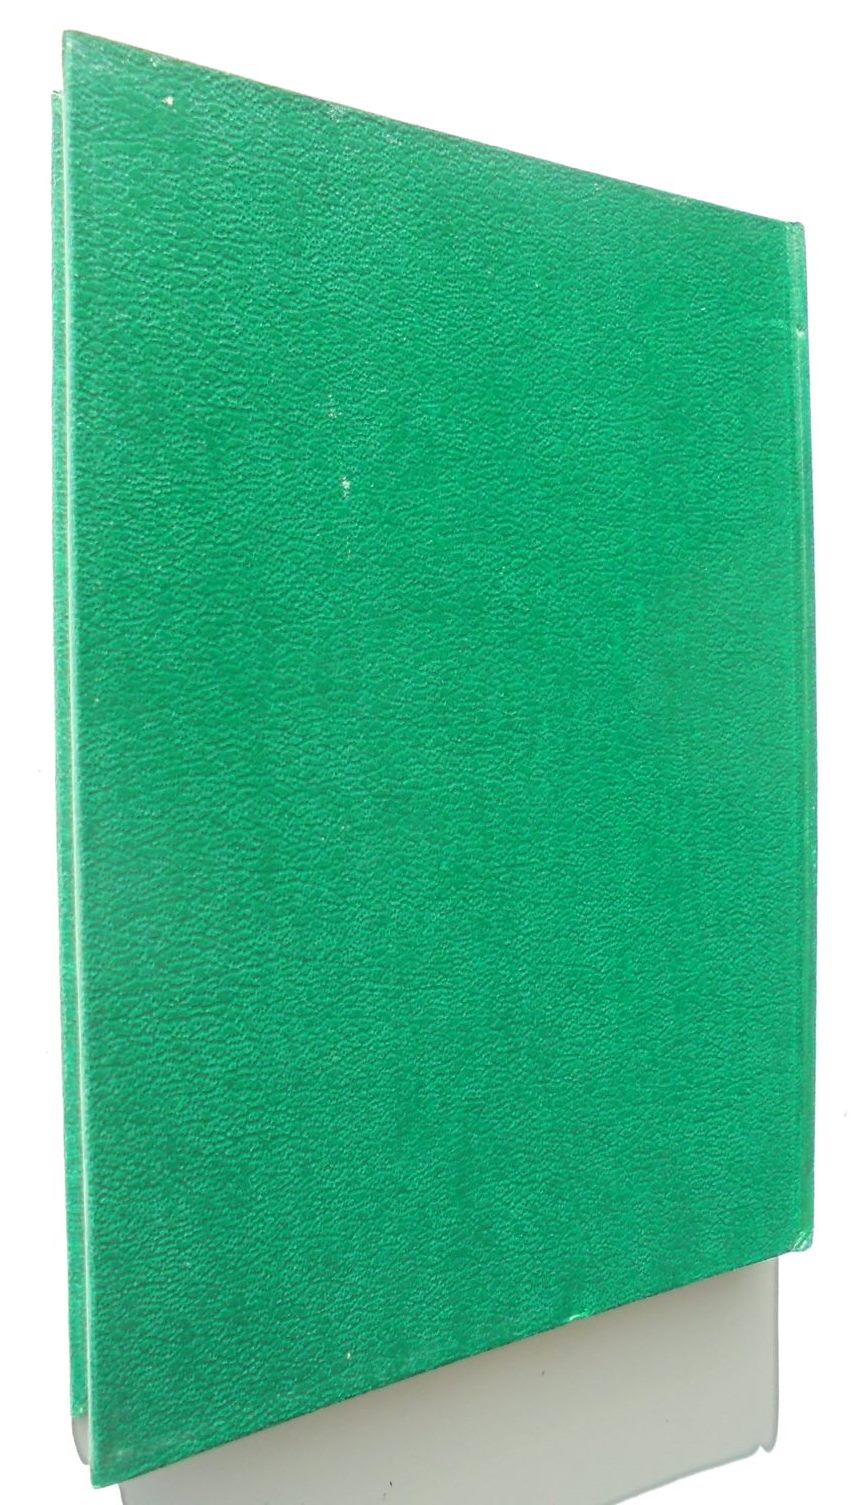 Hutt County Council Centenary 1877-1977 BY James M Daley. SIGNED BY AUTHOR. VERY SCARCE.